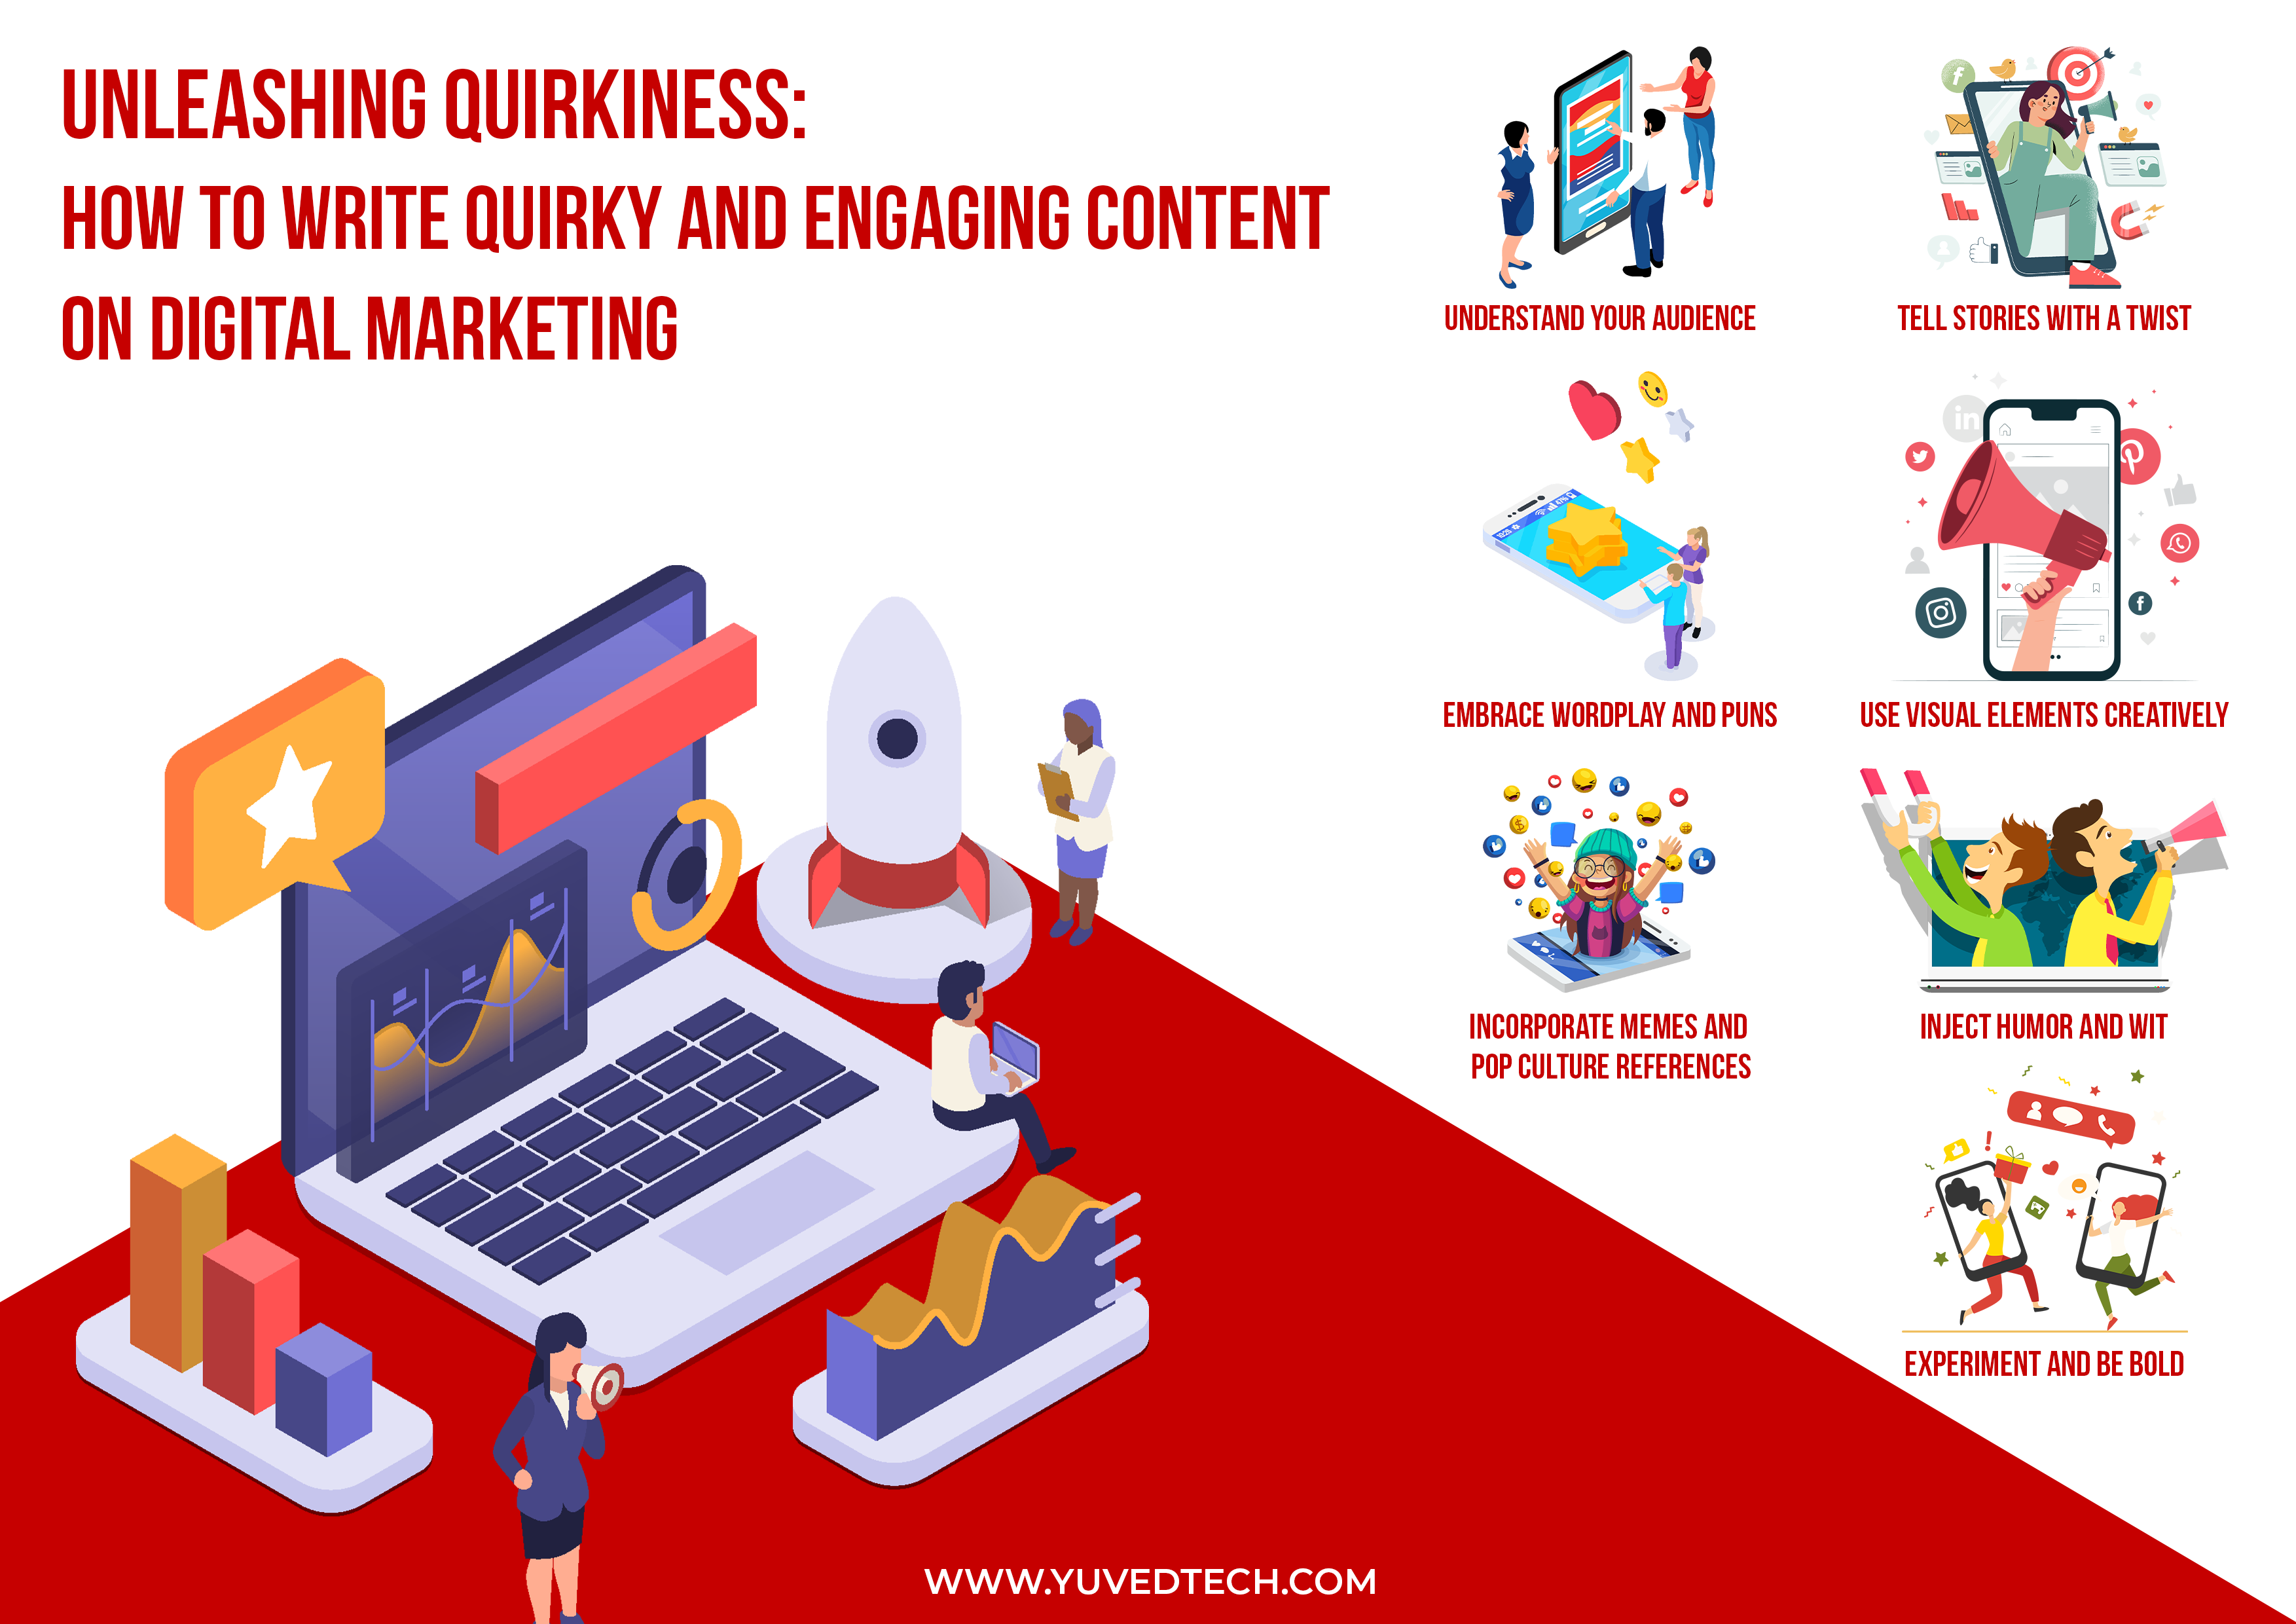 How to Write Quirky and Engaging Content On Digital Marketing